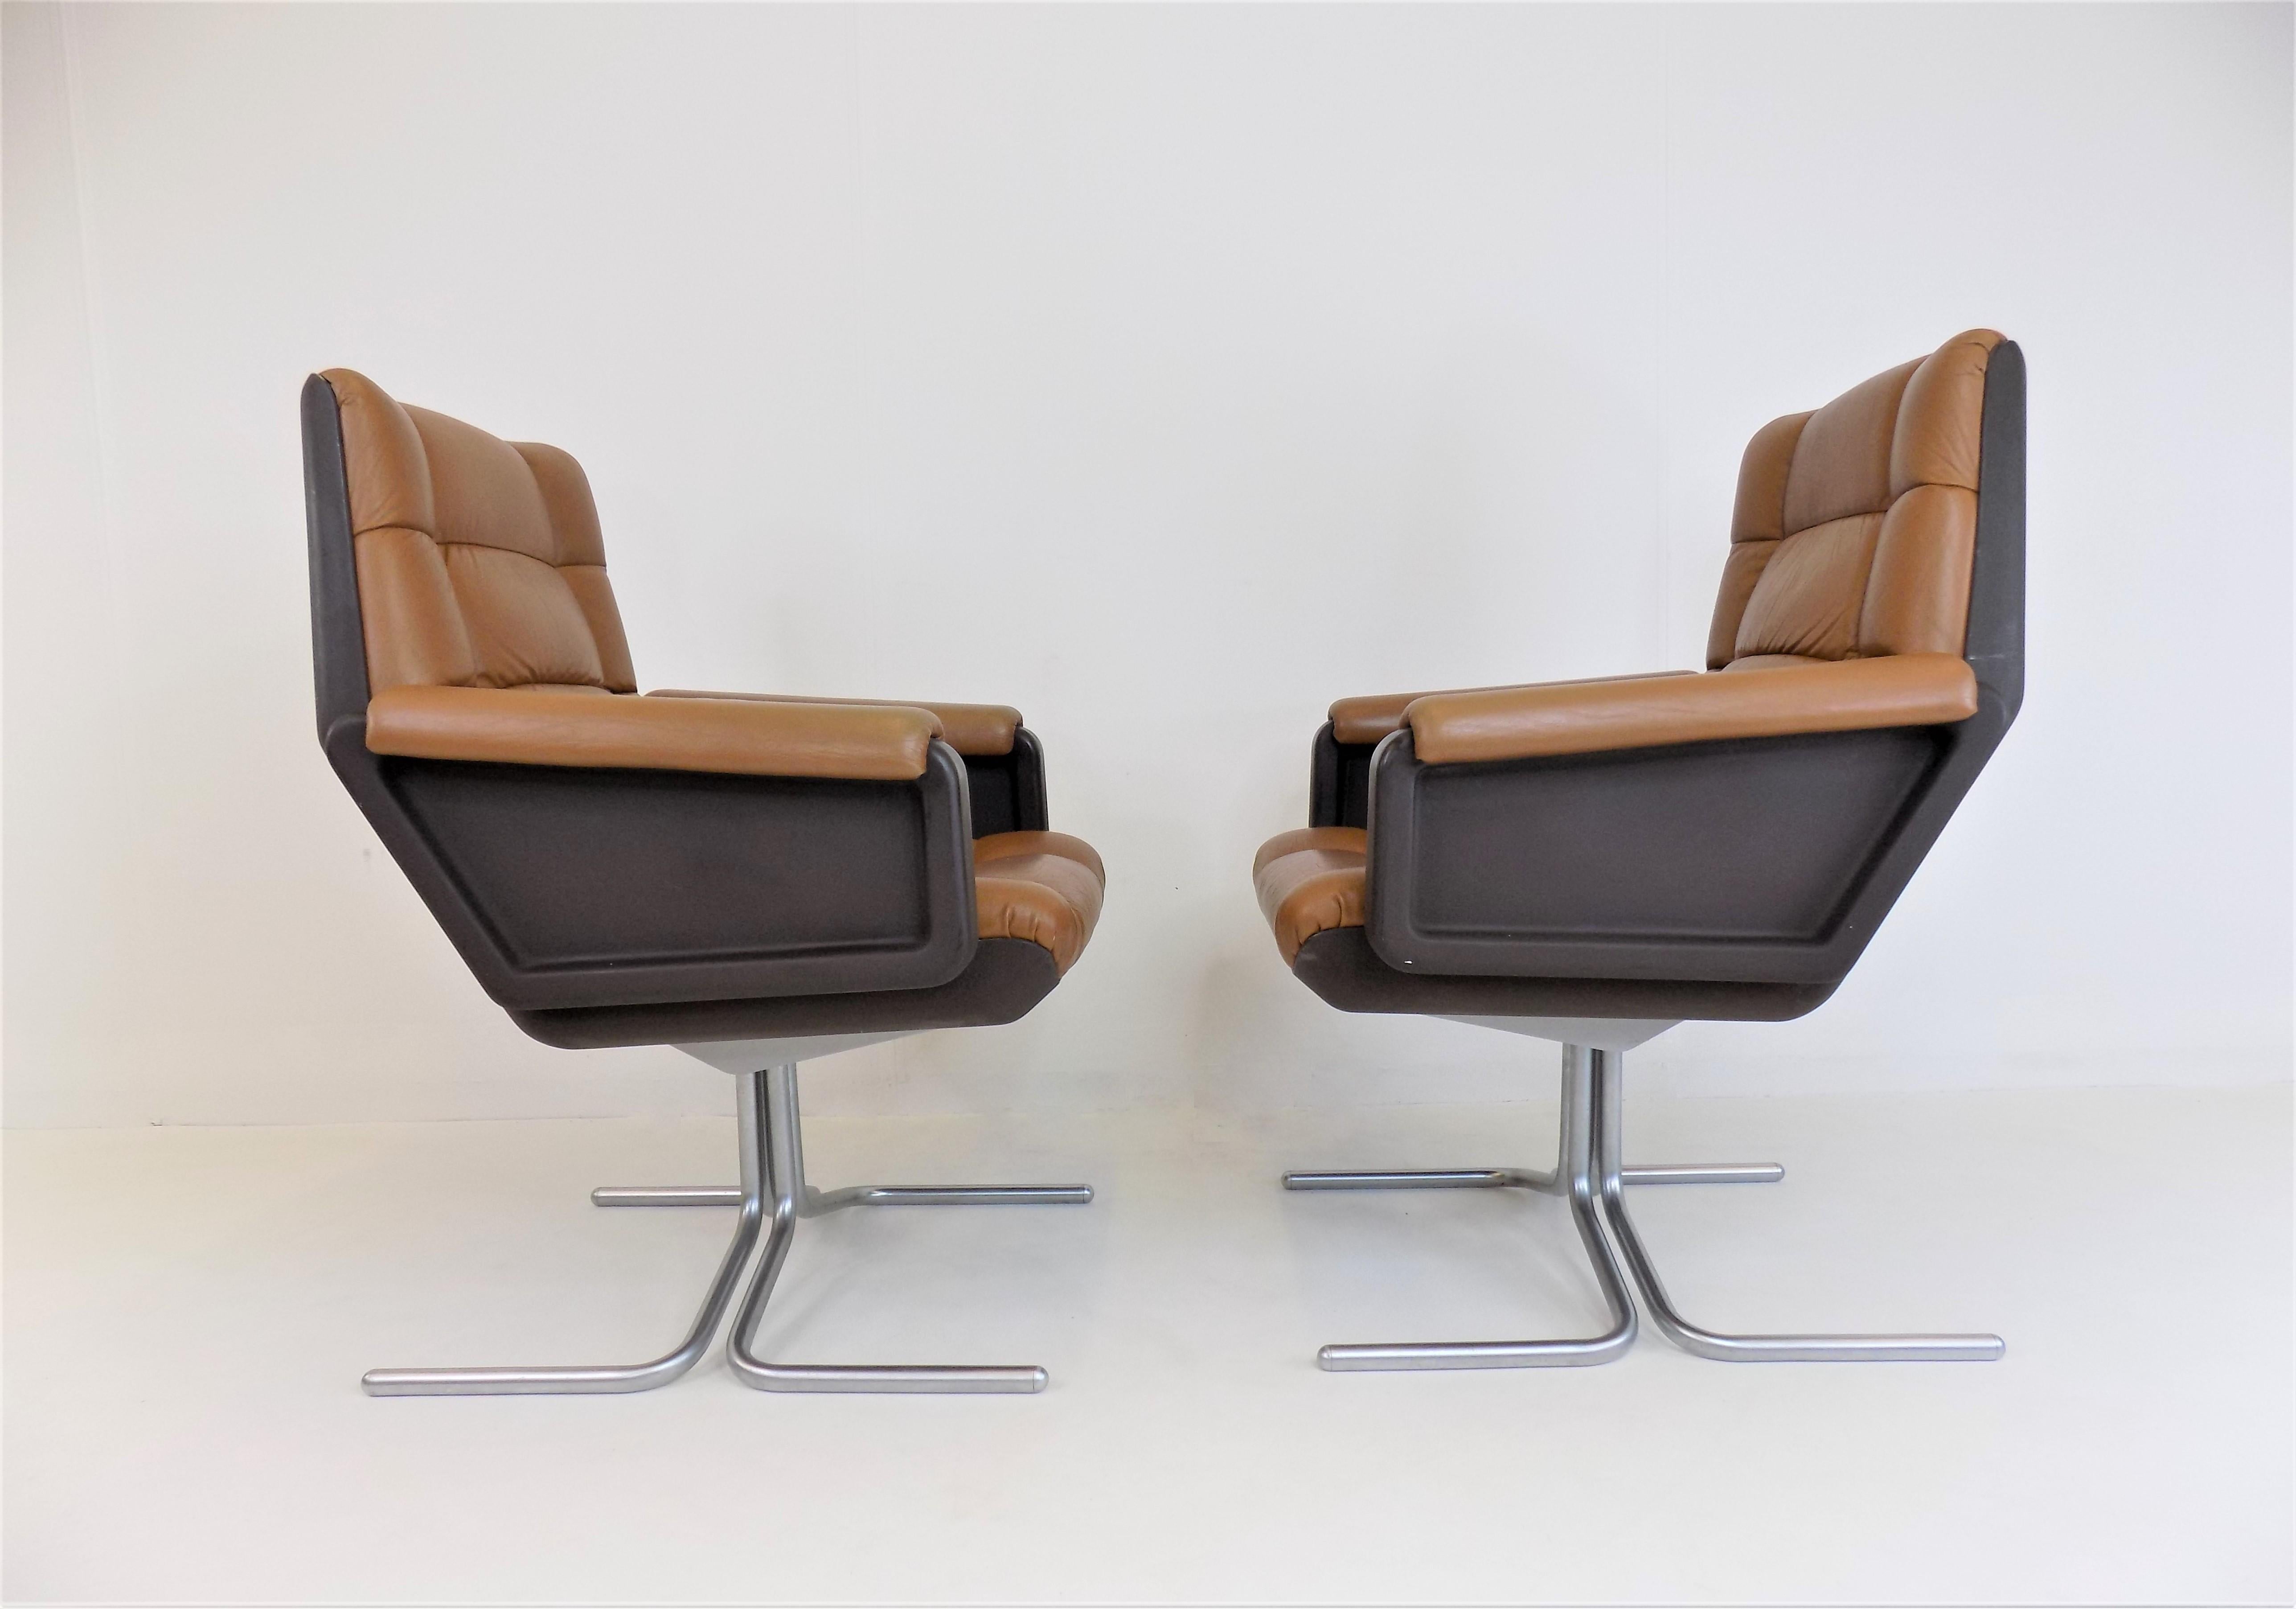 Space Age Set of 2 Mauser Seat 150 leather armchairs by Herbert Hirche